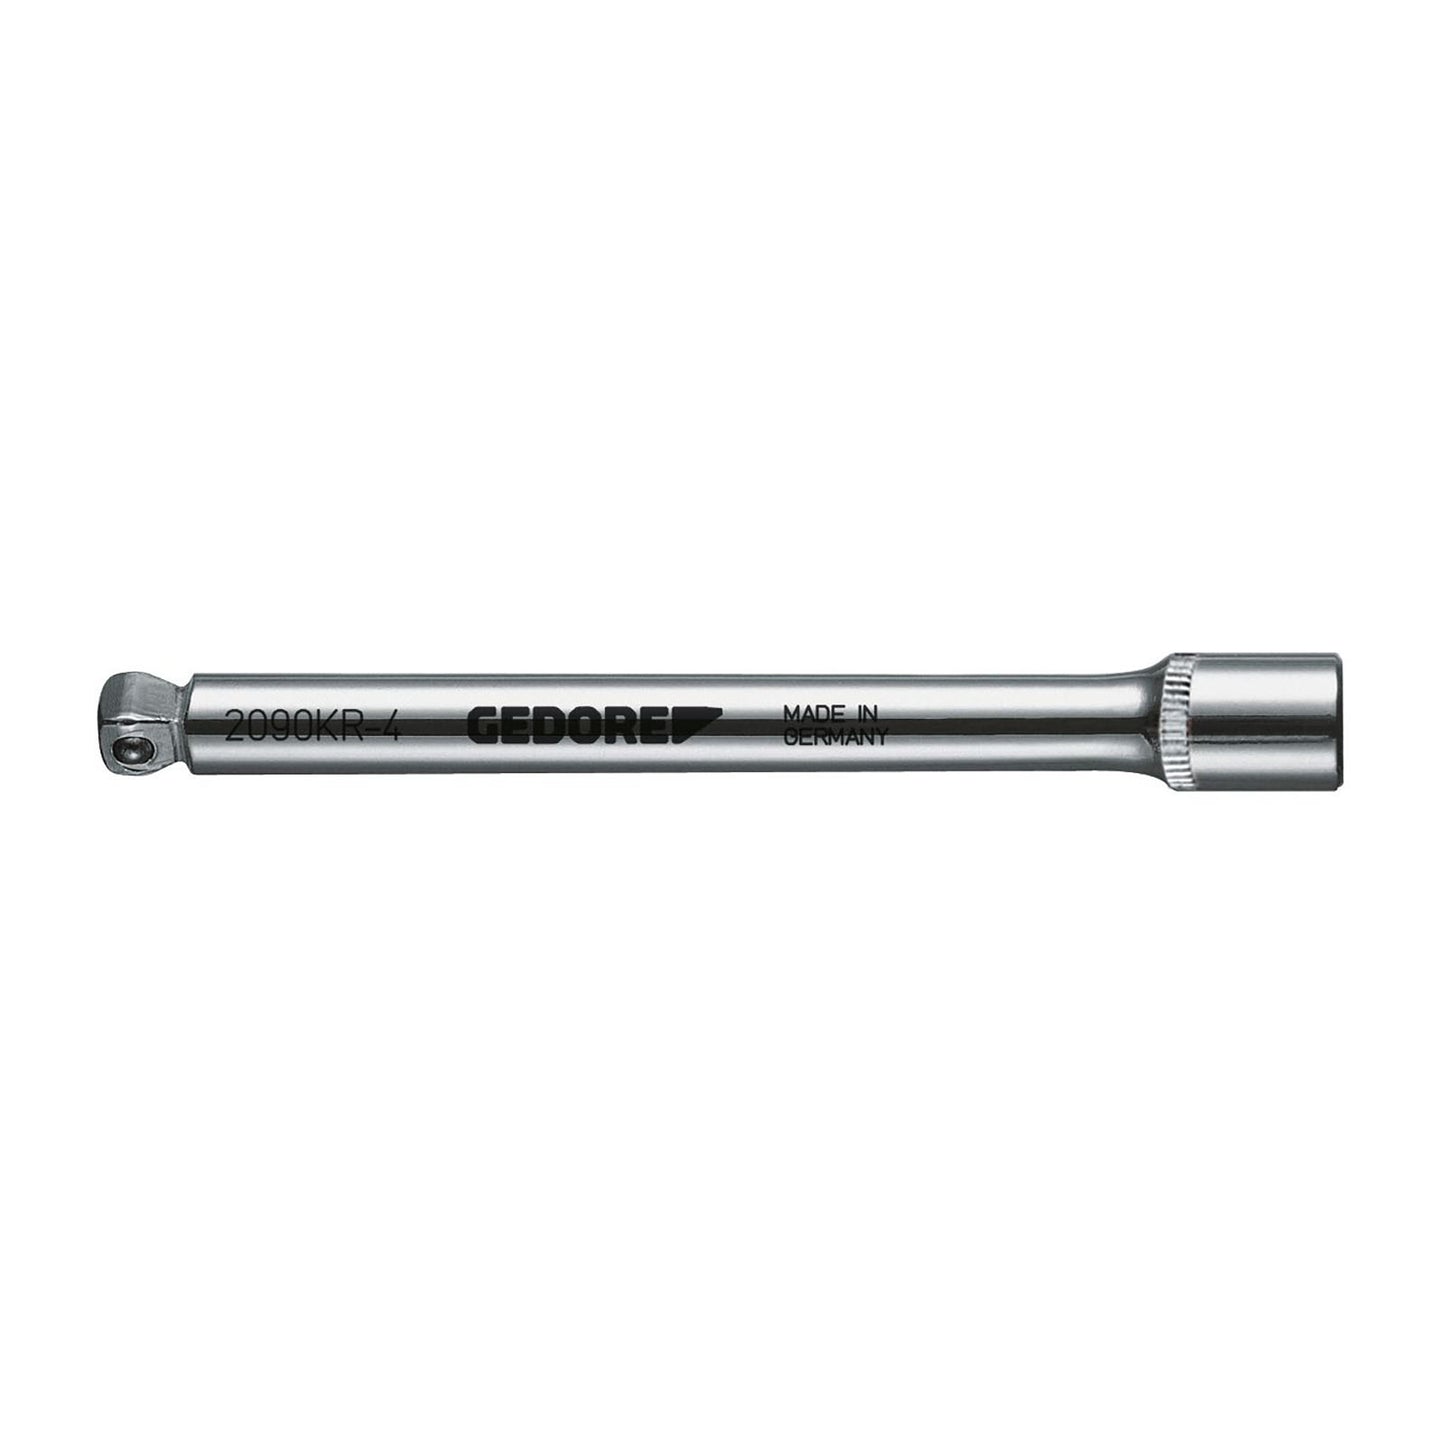 GEDORE 2090 KR-6 - 1/4" extension, 150 mm (6121030)